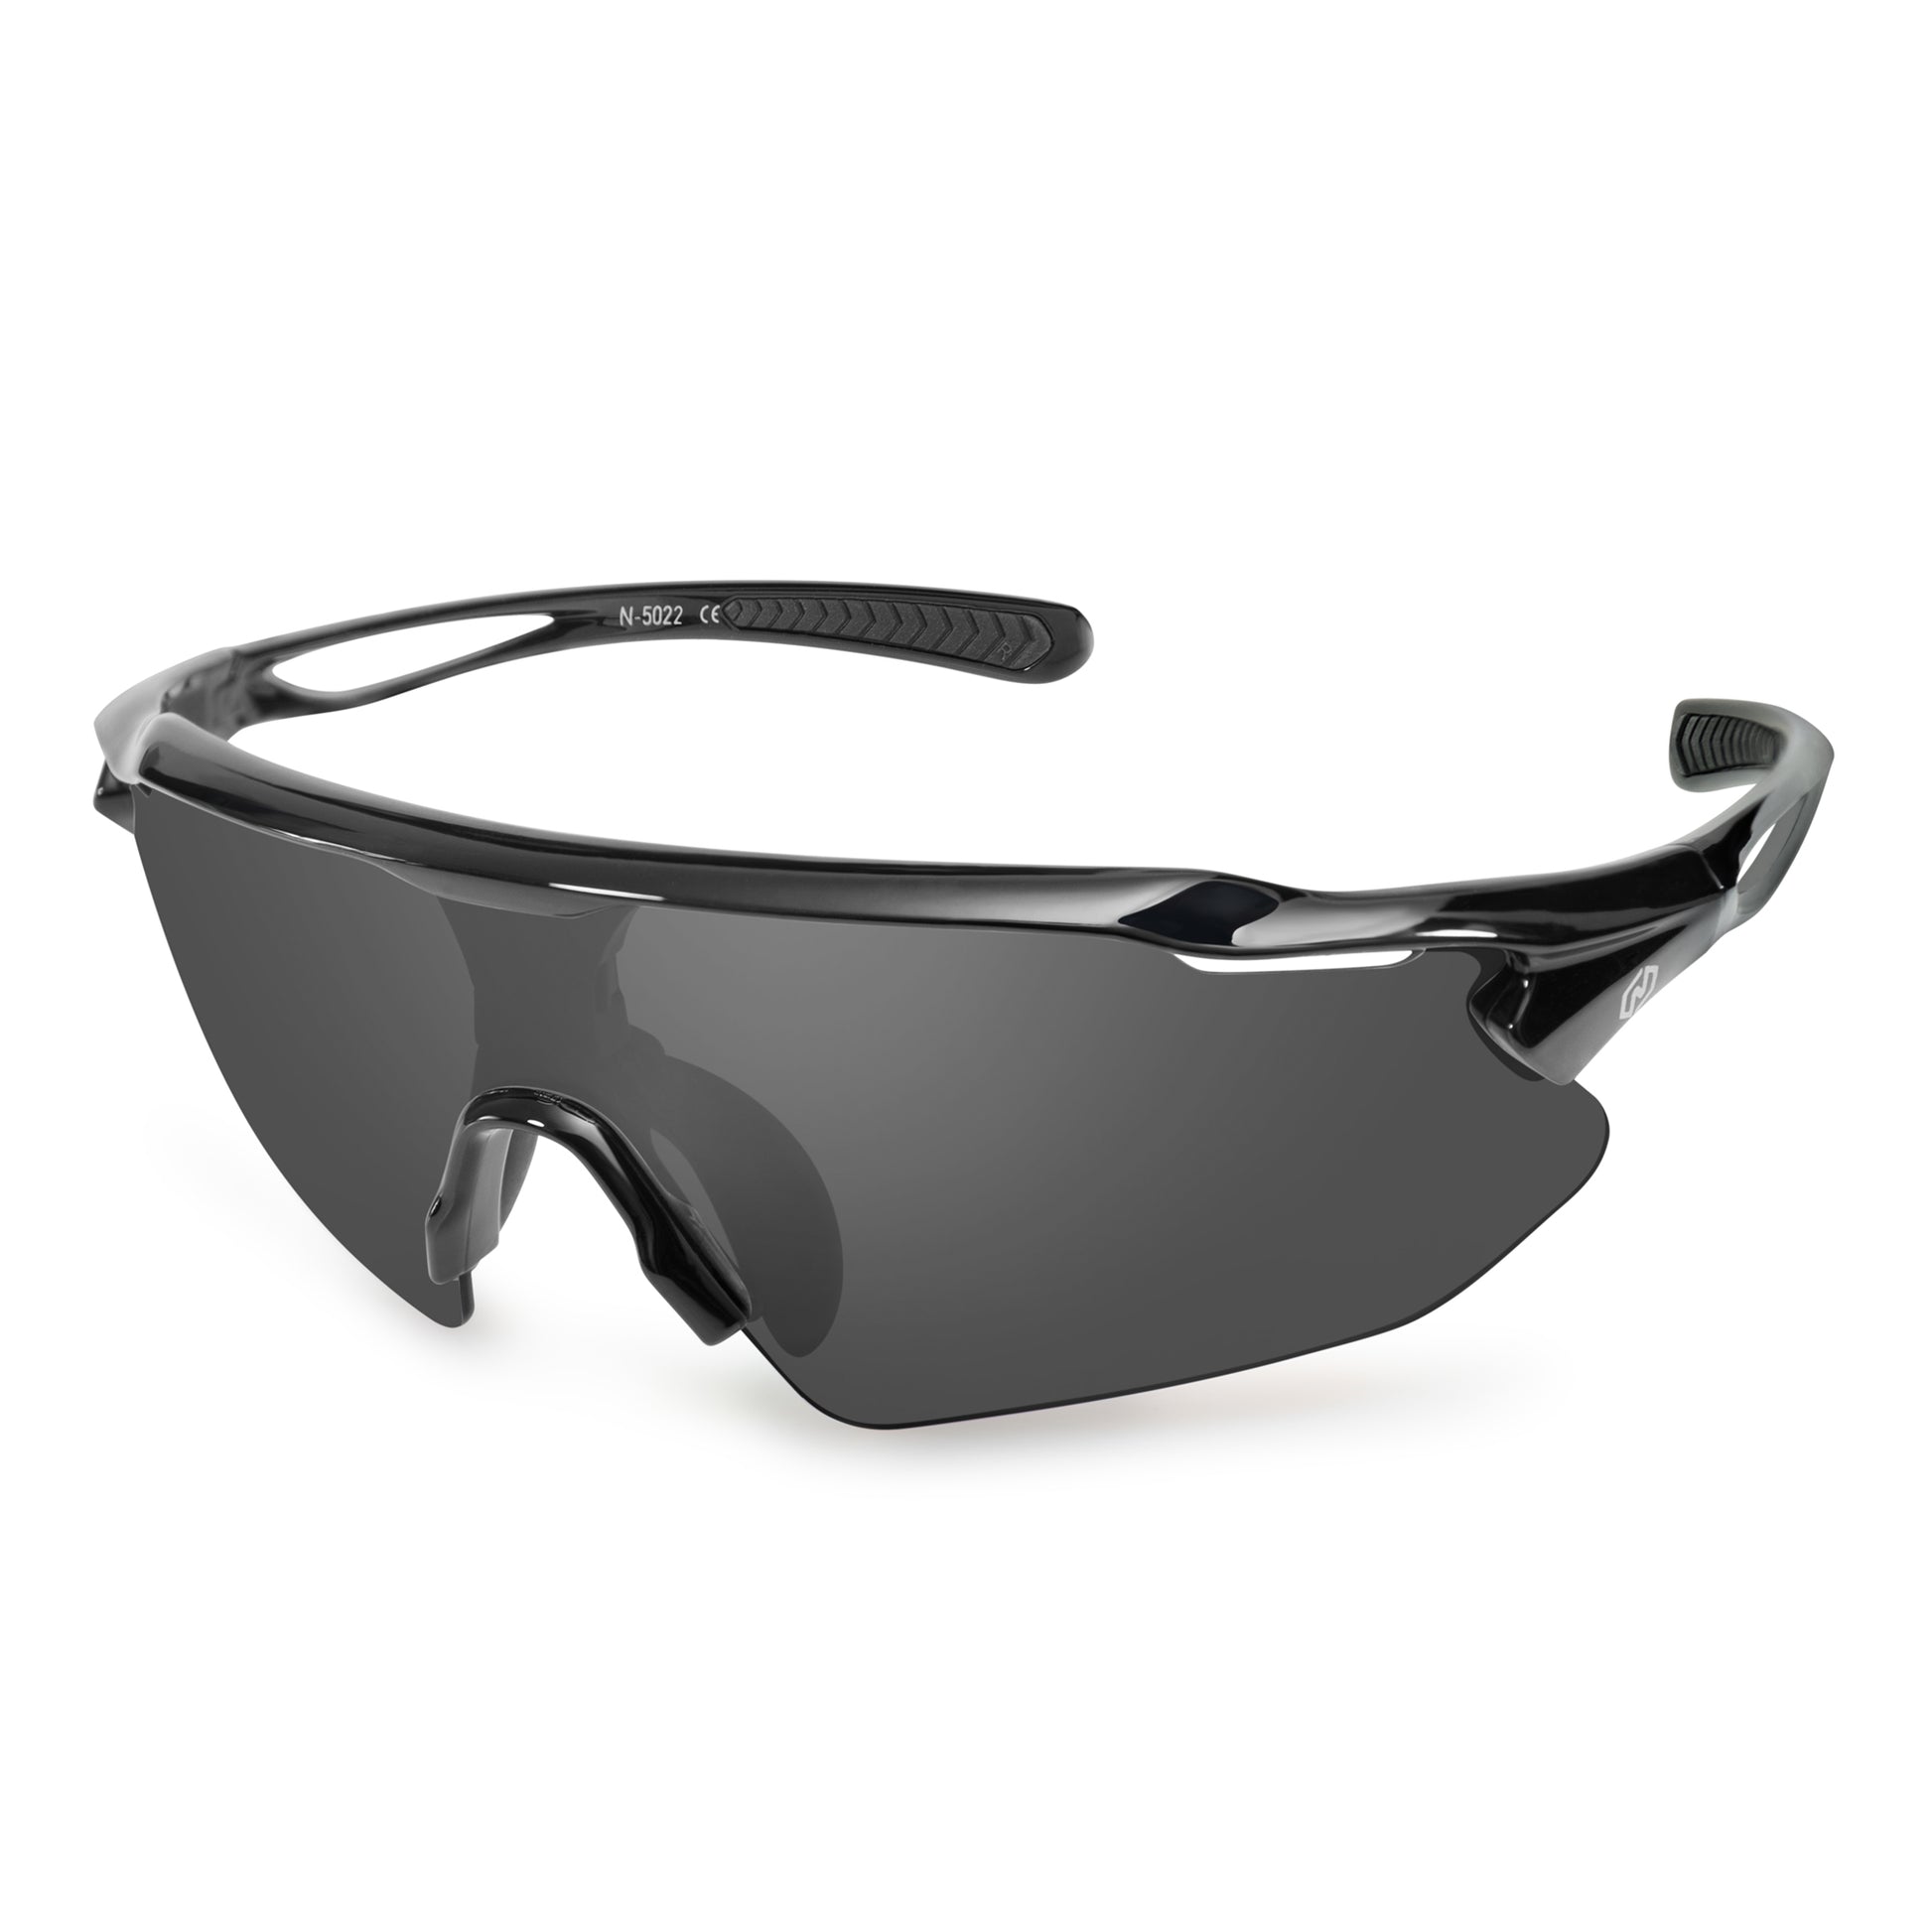 Aksel Diamant Cycling/Running/ Sunglasses UV Protection for Women Men